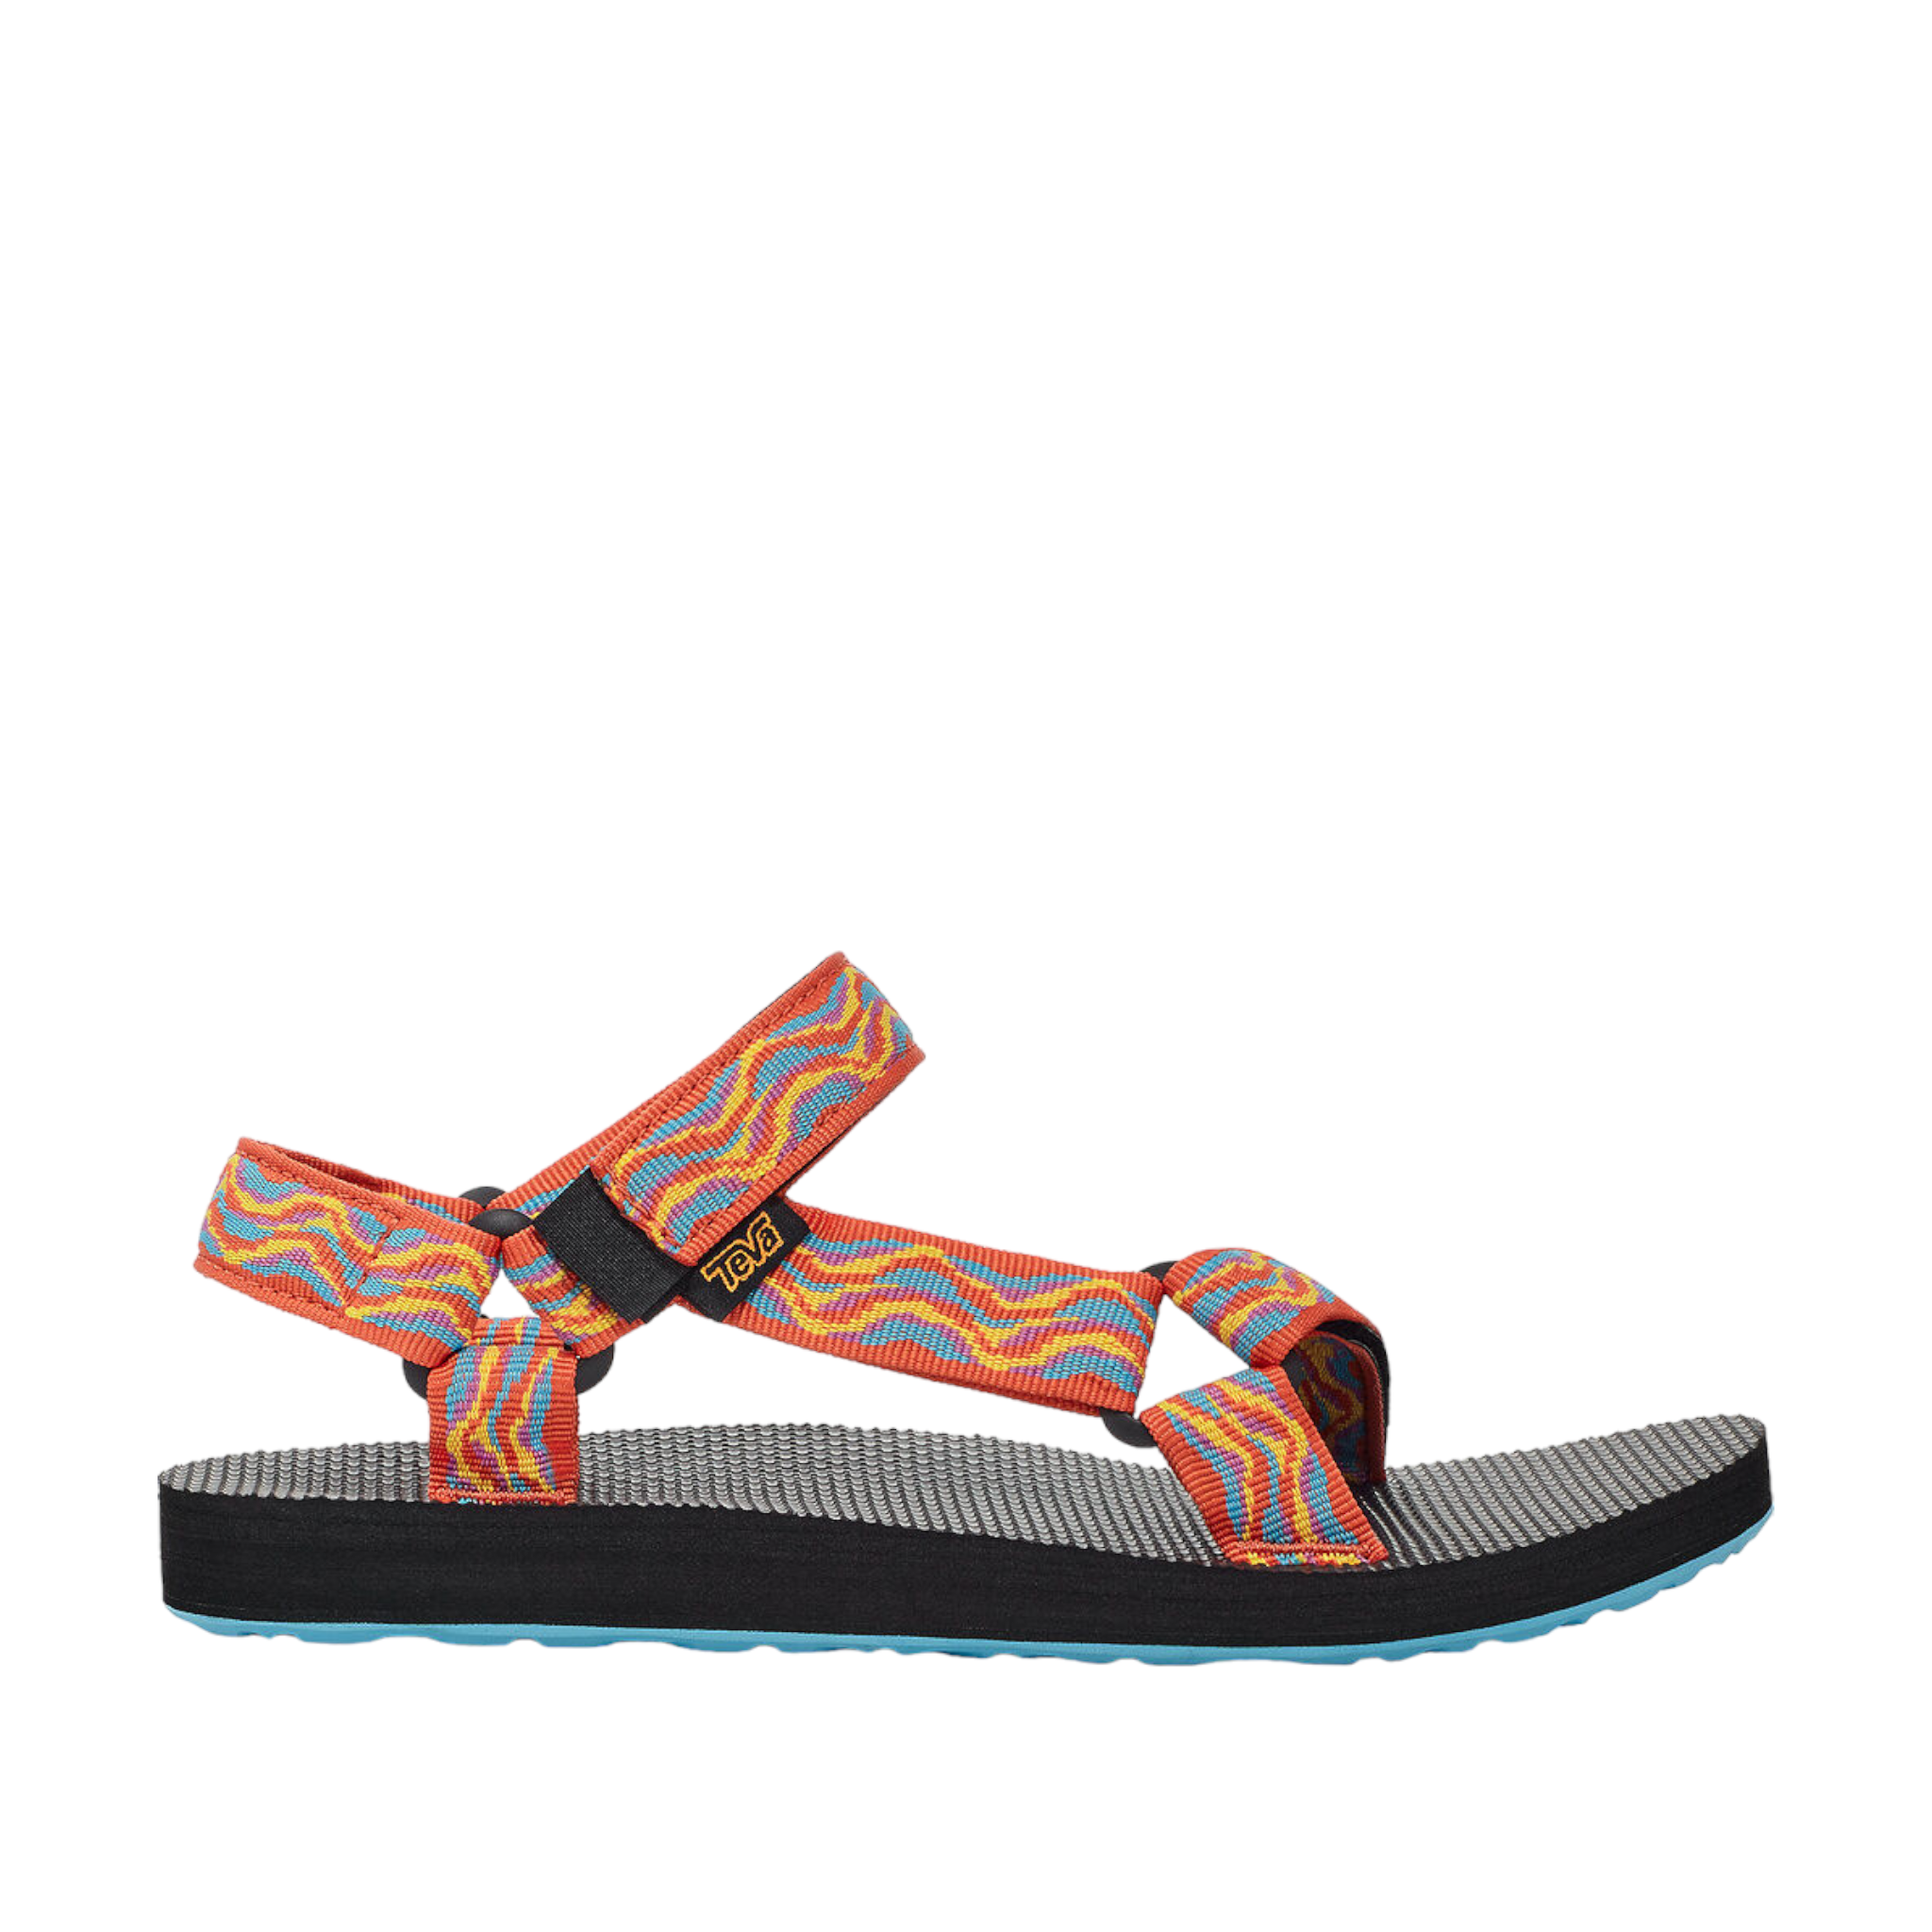 Shop W Original Universal Revive - with shoe&amp;me - from Teva - Sandals - Sandals, Summer, Winter, Womens